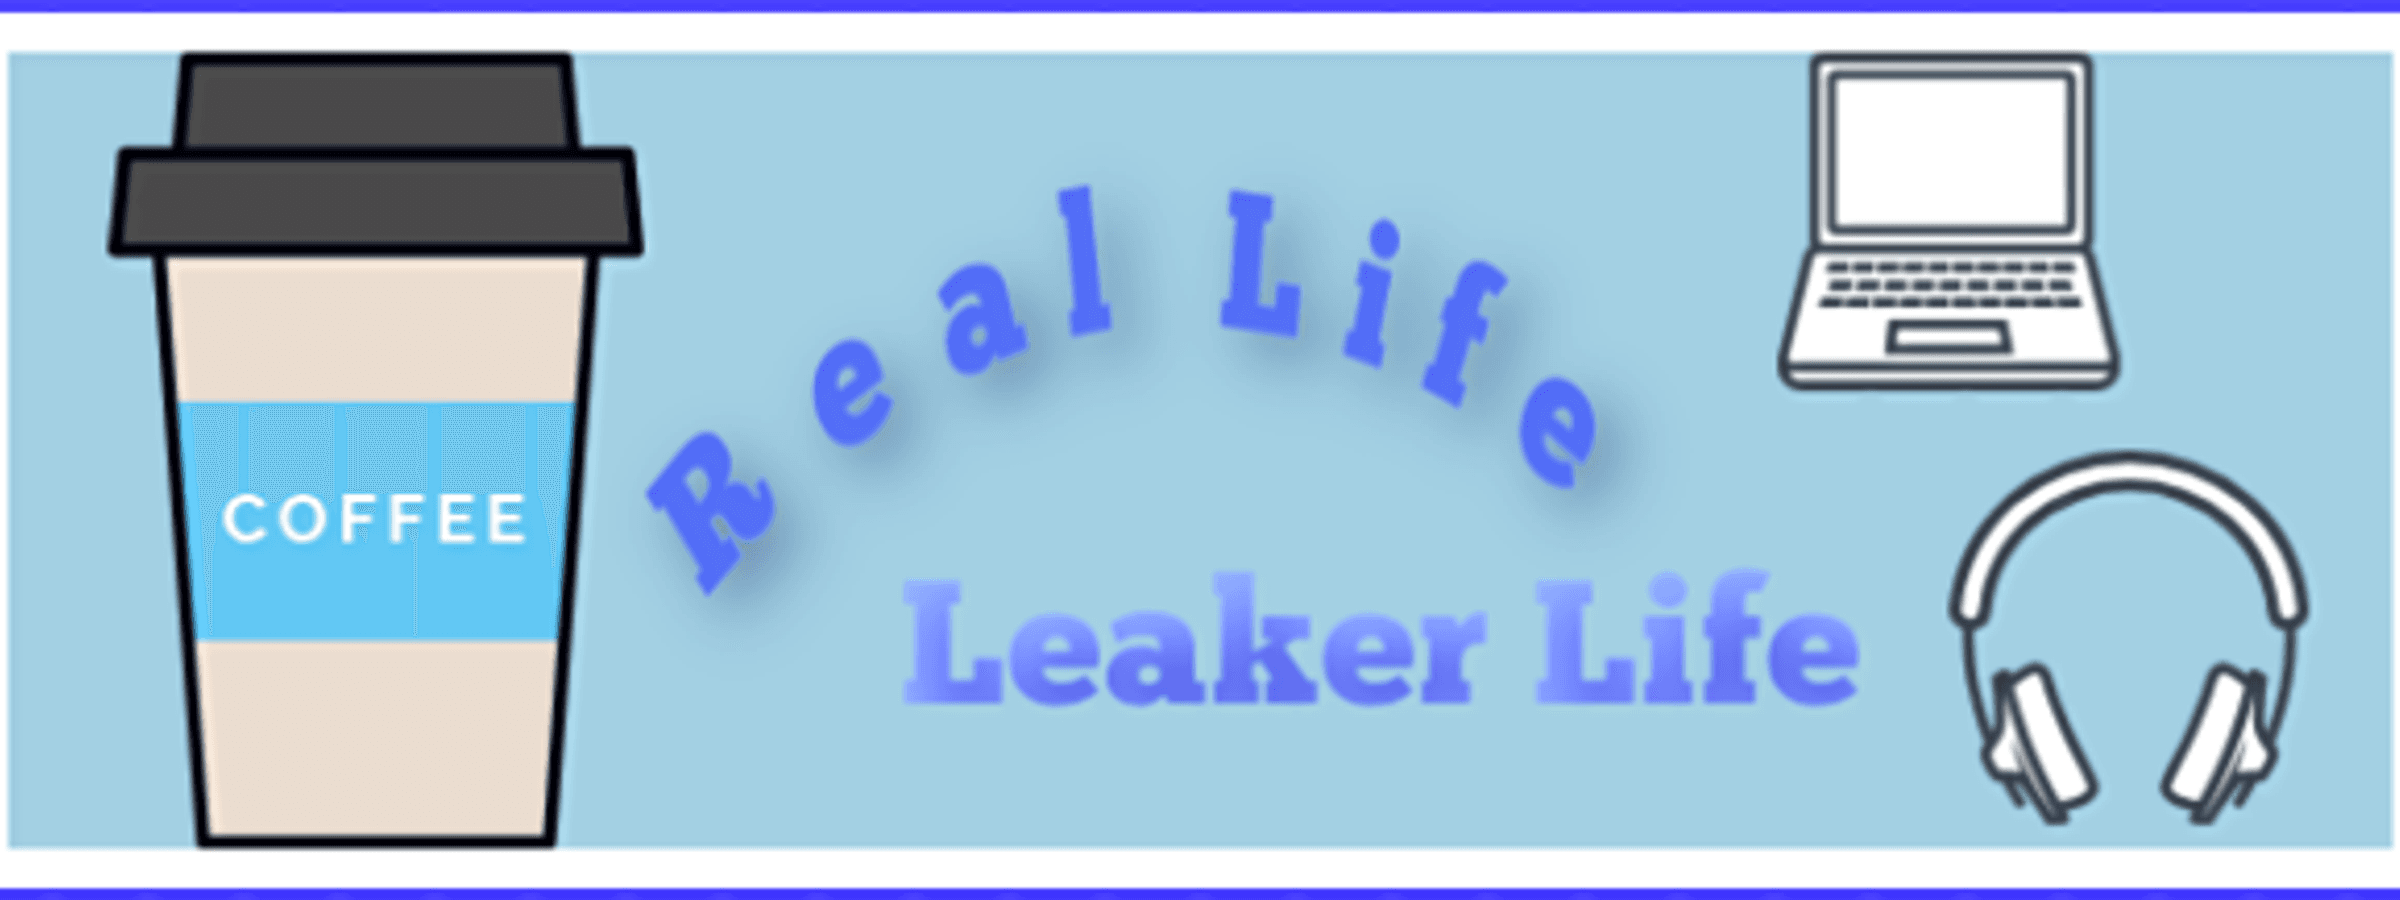 An illustration of coffee, laptop, and headphones that says "Real Life" "Leaker Life".